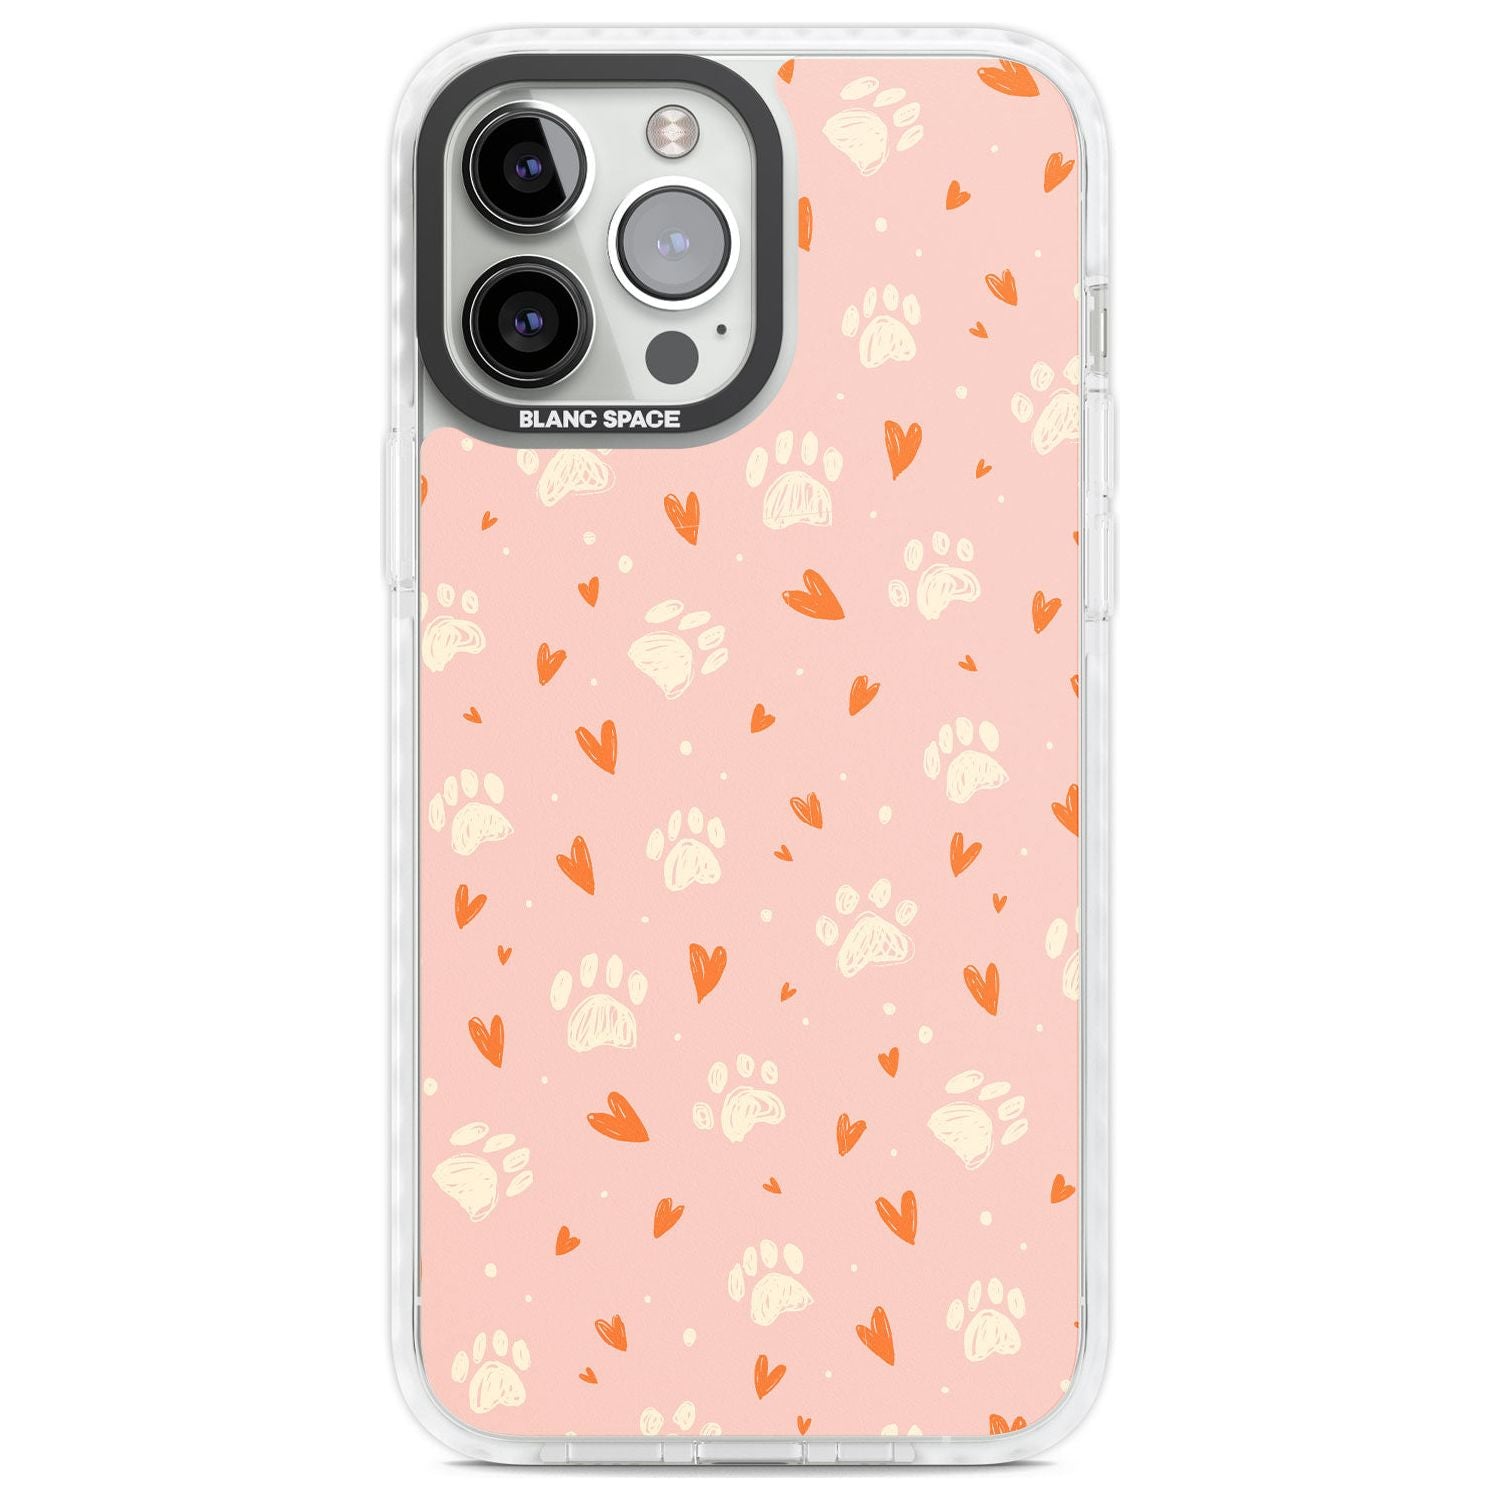 Paws & Hearts Pattern Phone Case iPhone 13 Pro Max / Impact Case,iPhone 14 Pro Max / Impact Case Blanc Space